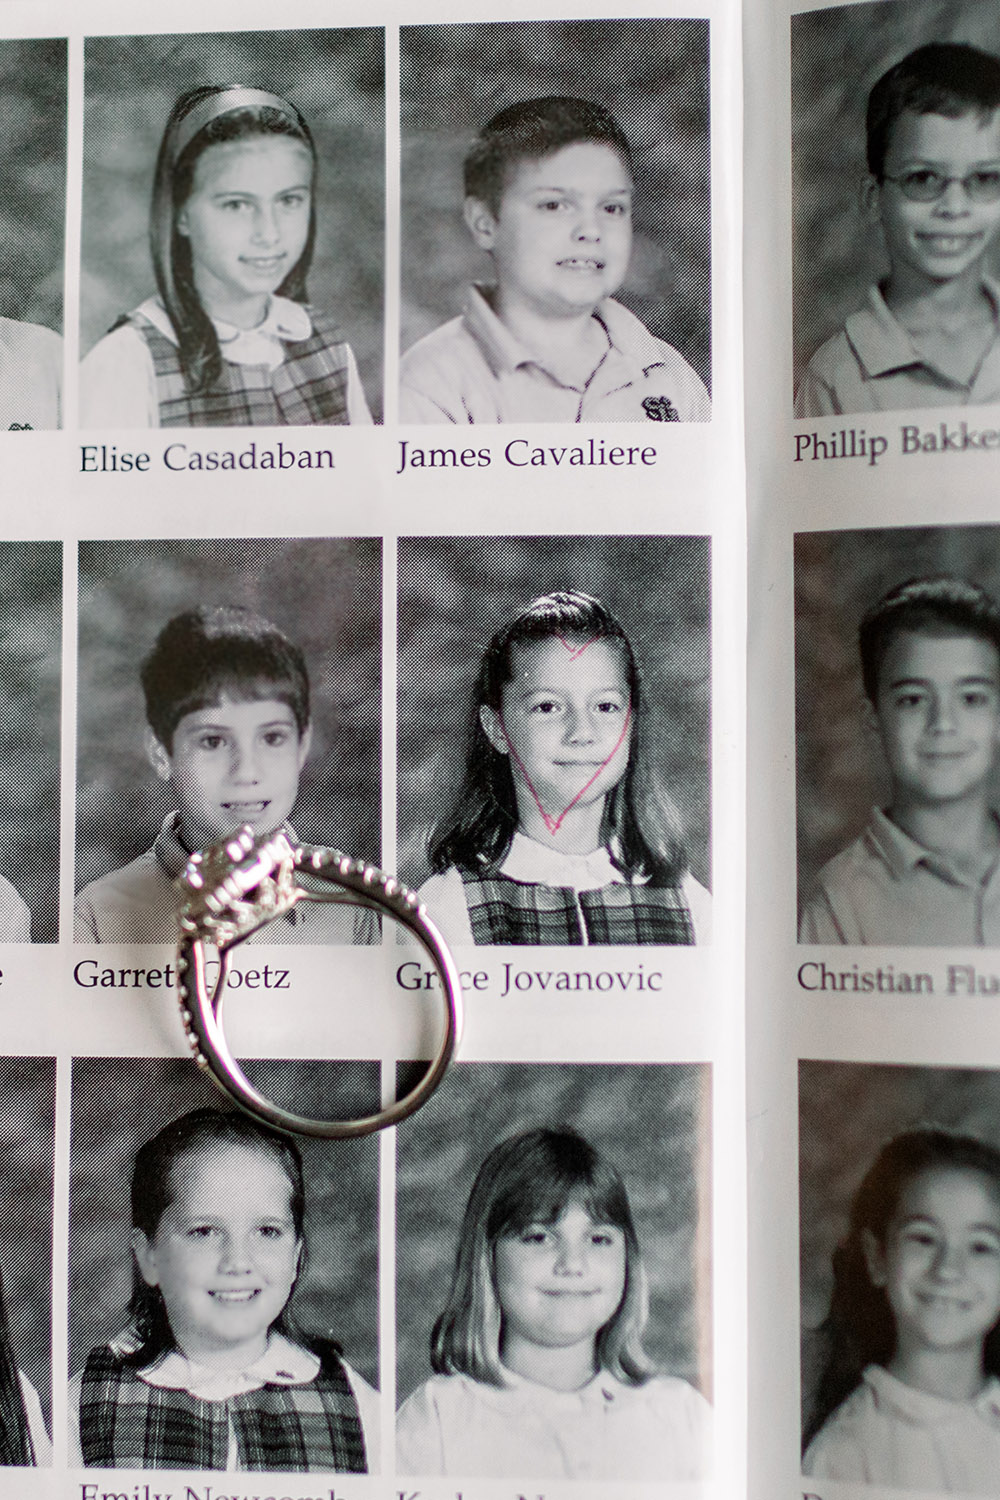 Ross had drawn a heart around Gracie's 4th grade yearbook photo.